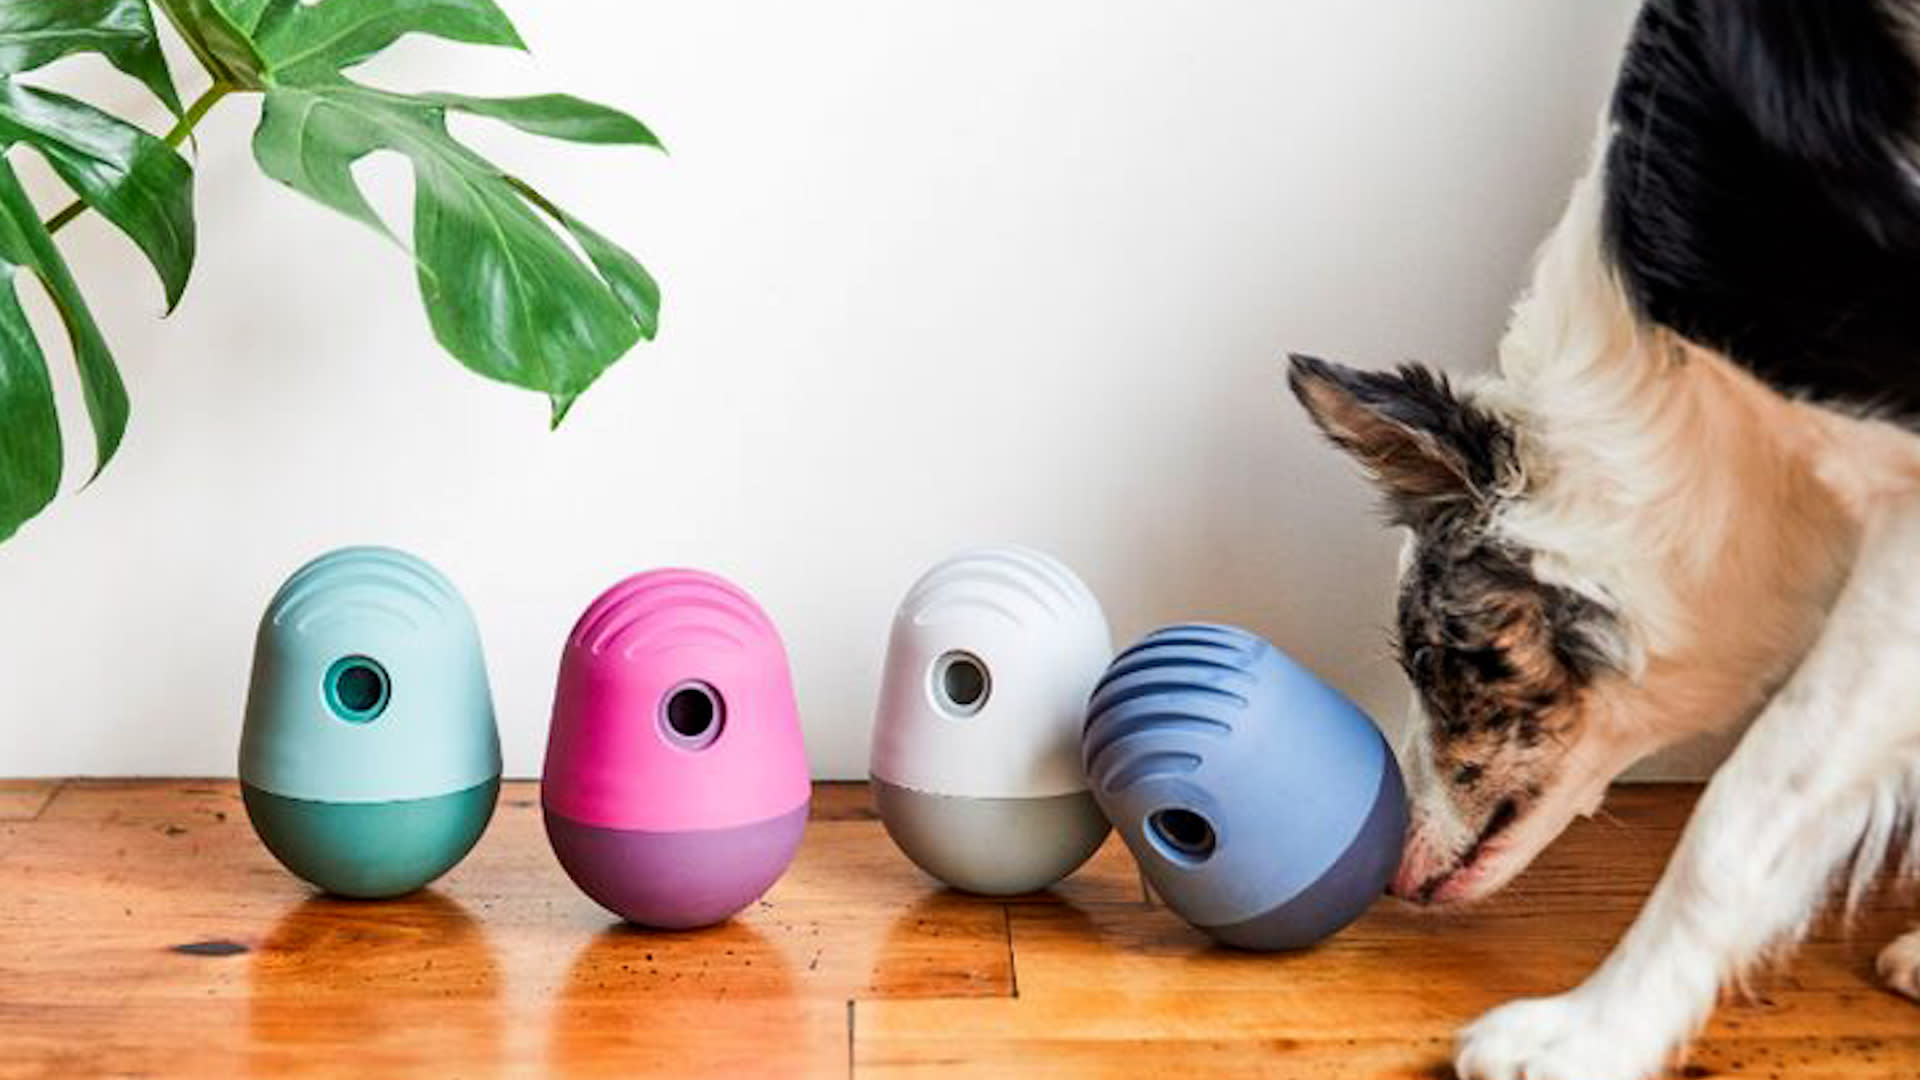 Work your dog's brain with this interactive food-dispensing toy